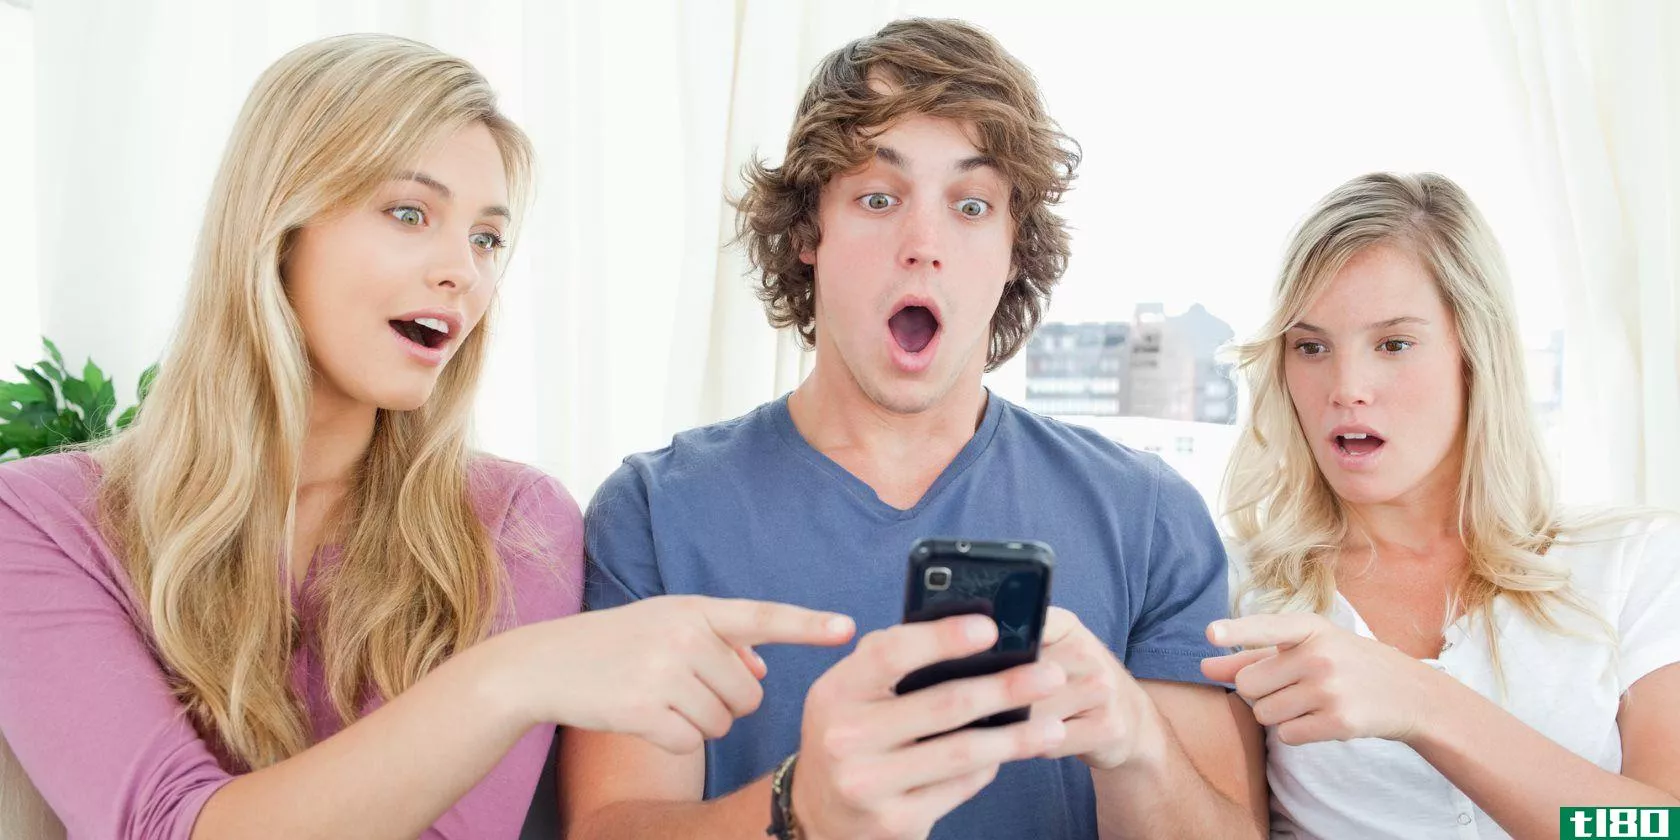 shocked-look-on-the-boy-and-his-friends-faces-as-they-read-the-text-message